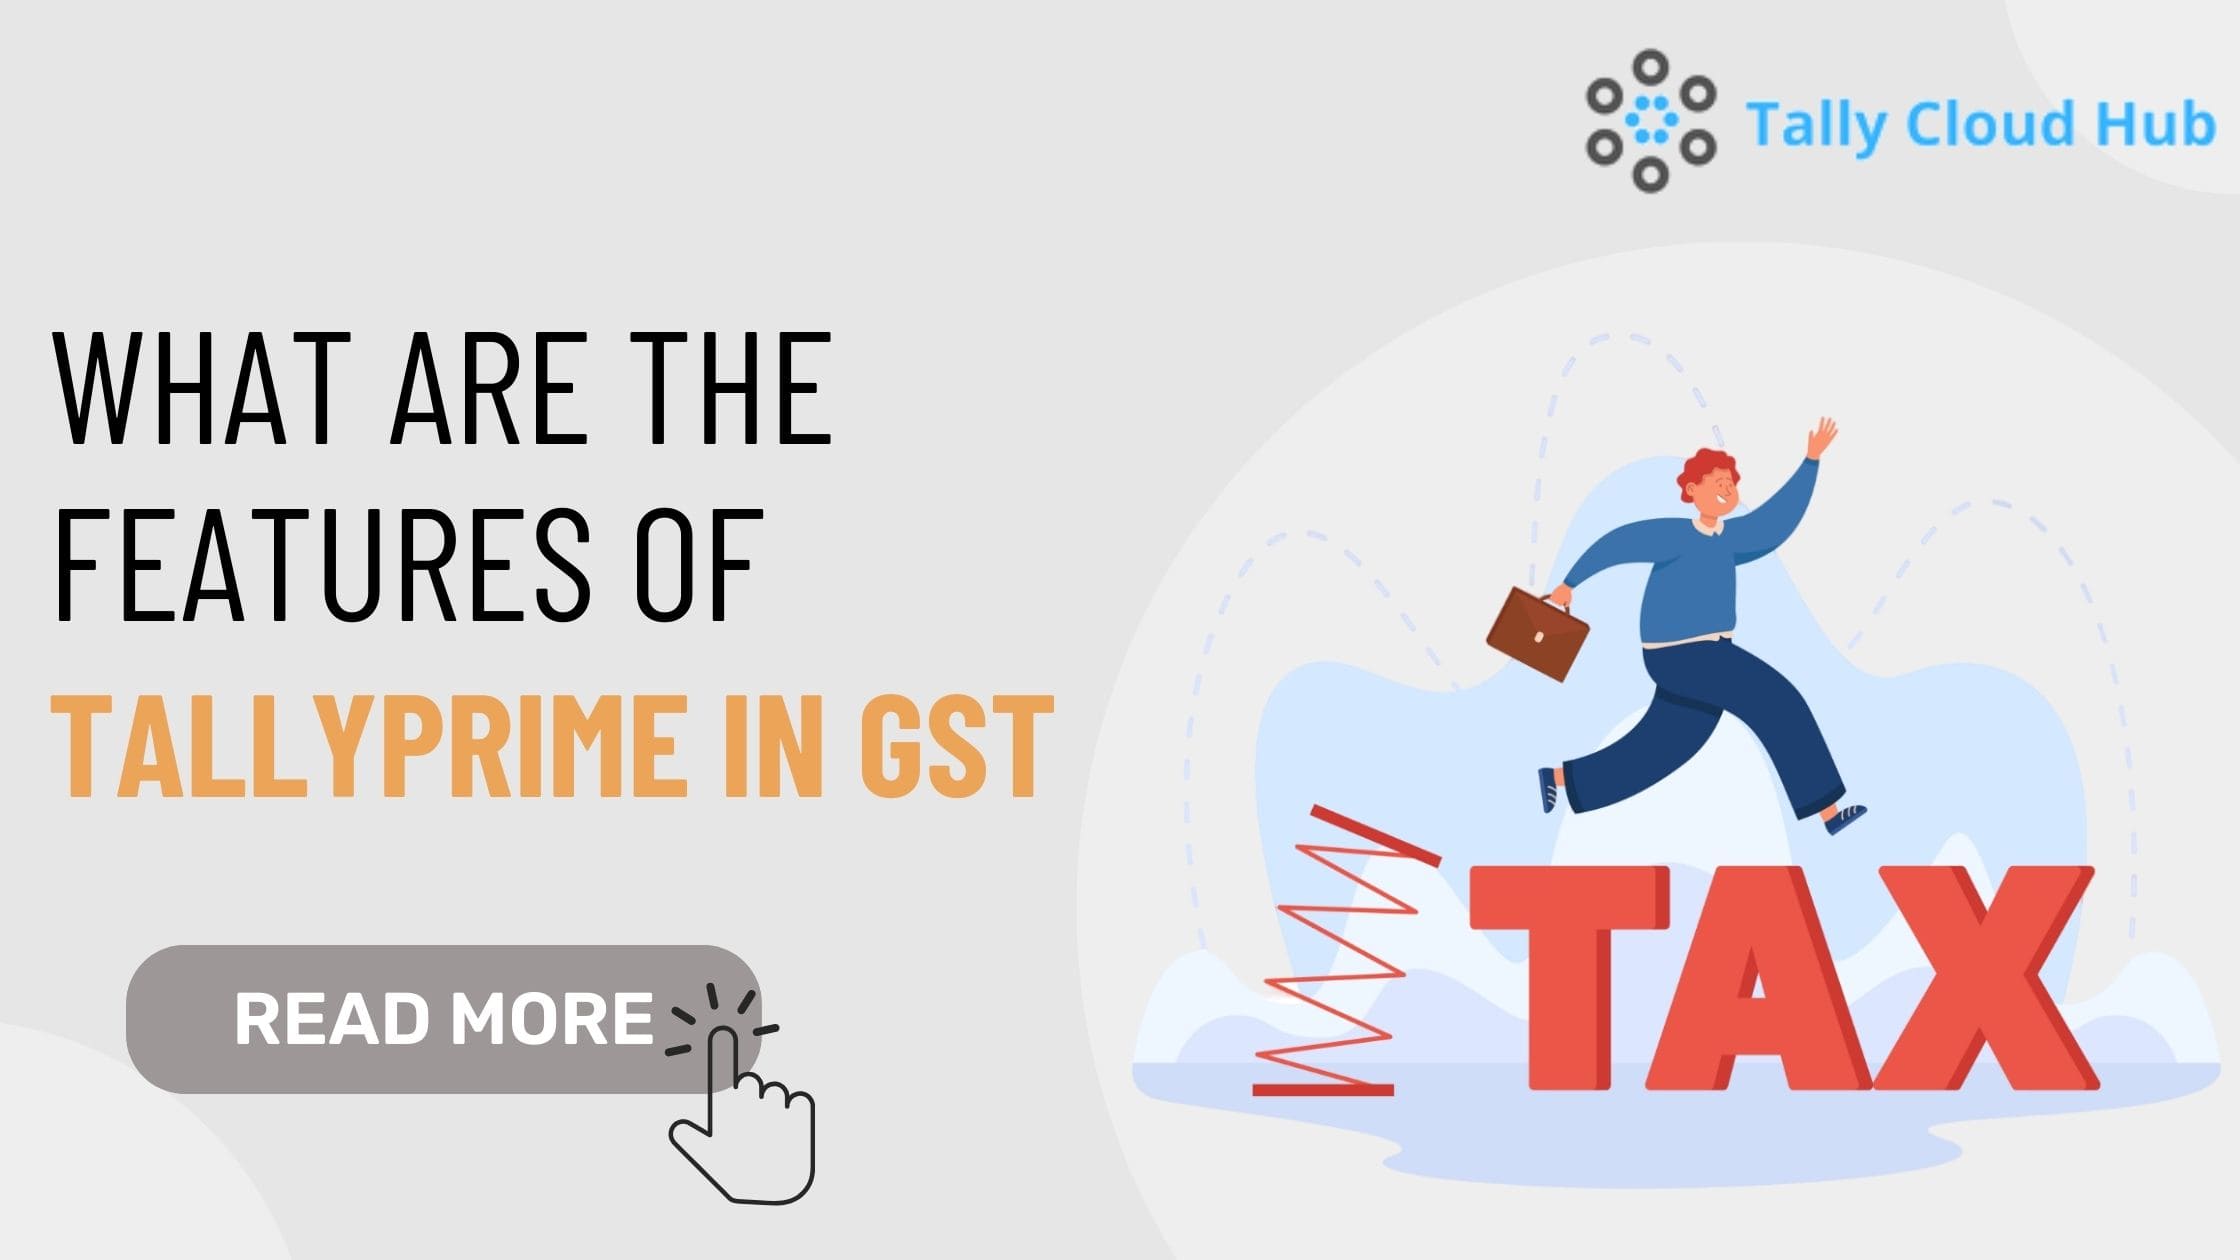 The Goods and Services Tax (GST) is a significant tax reform that has changed the taxation landscape in India.